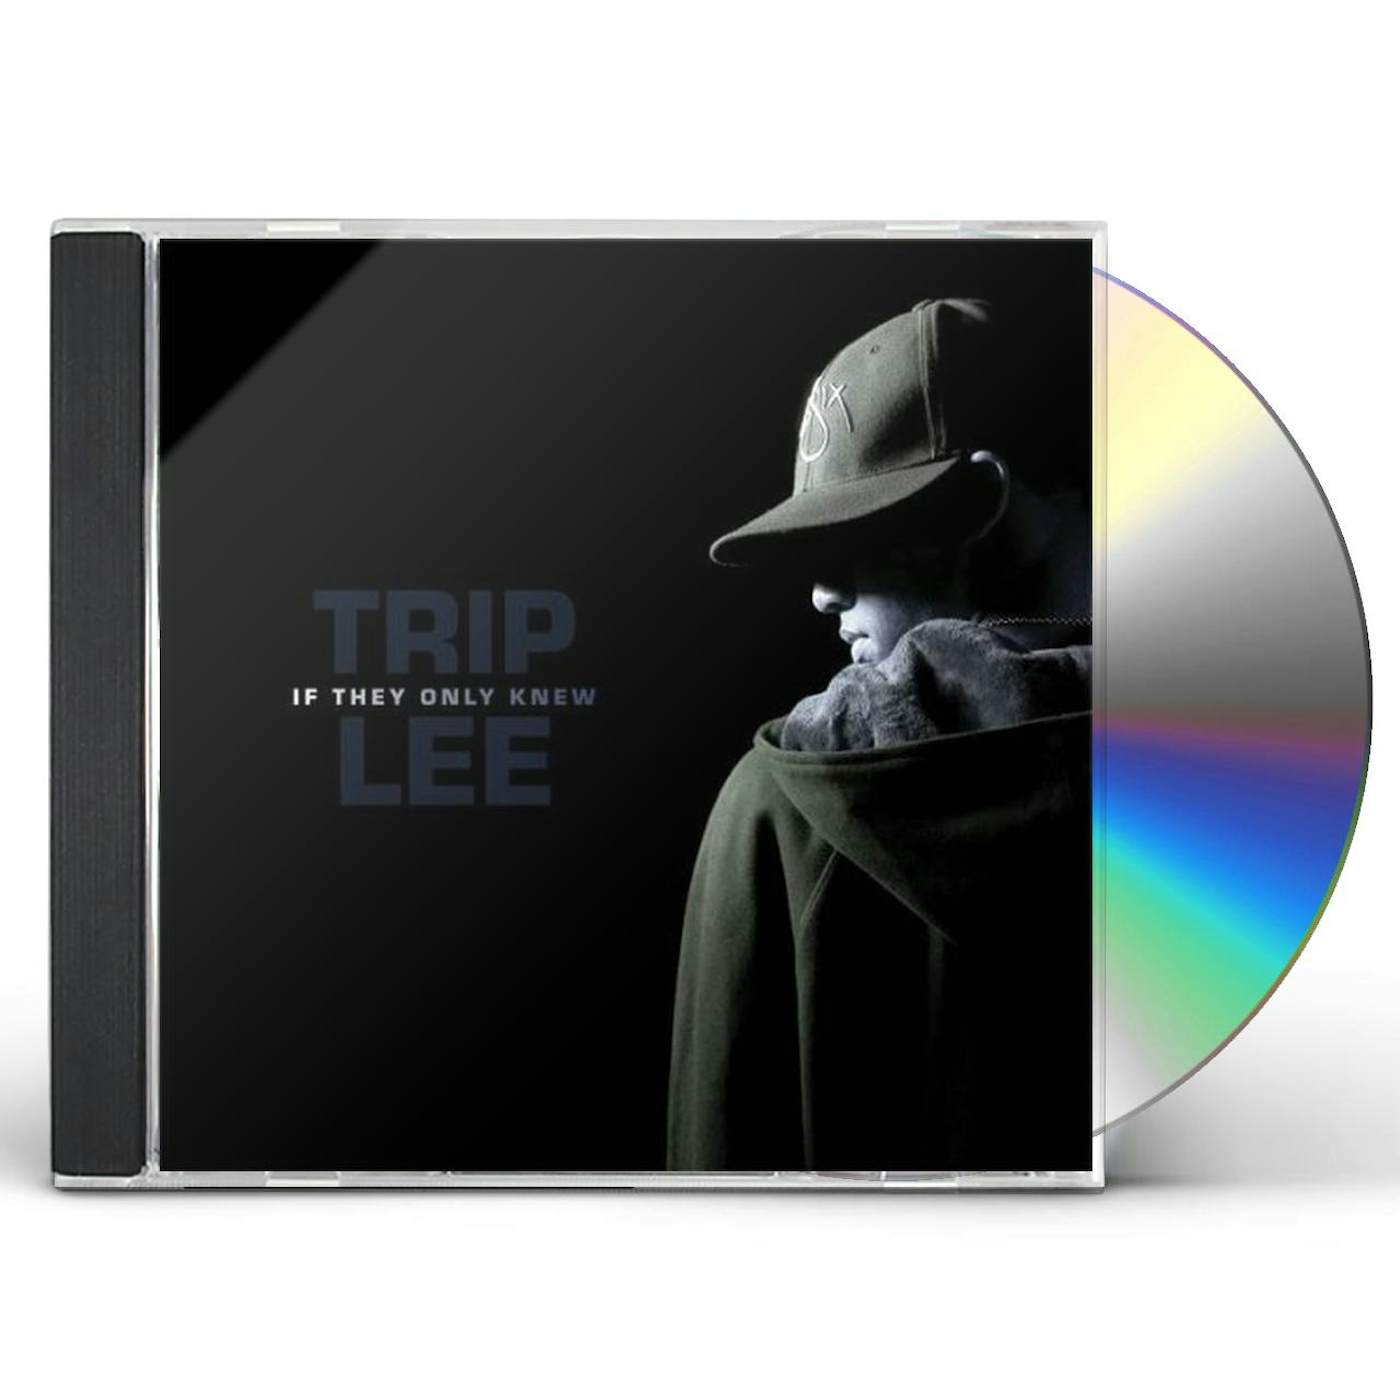 Trip Lee IF THEY ONLY KNEW CD